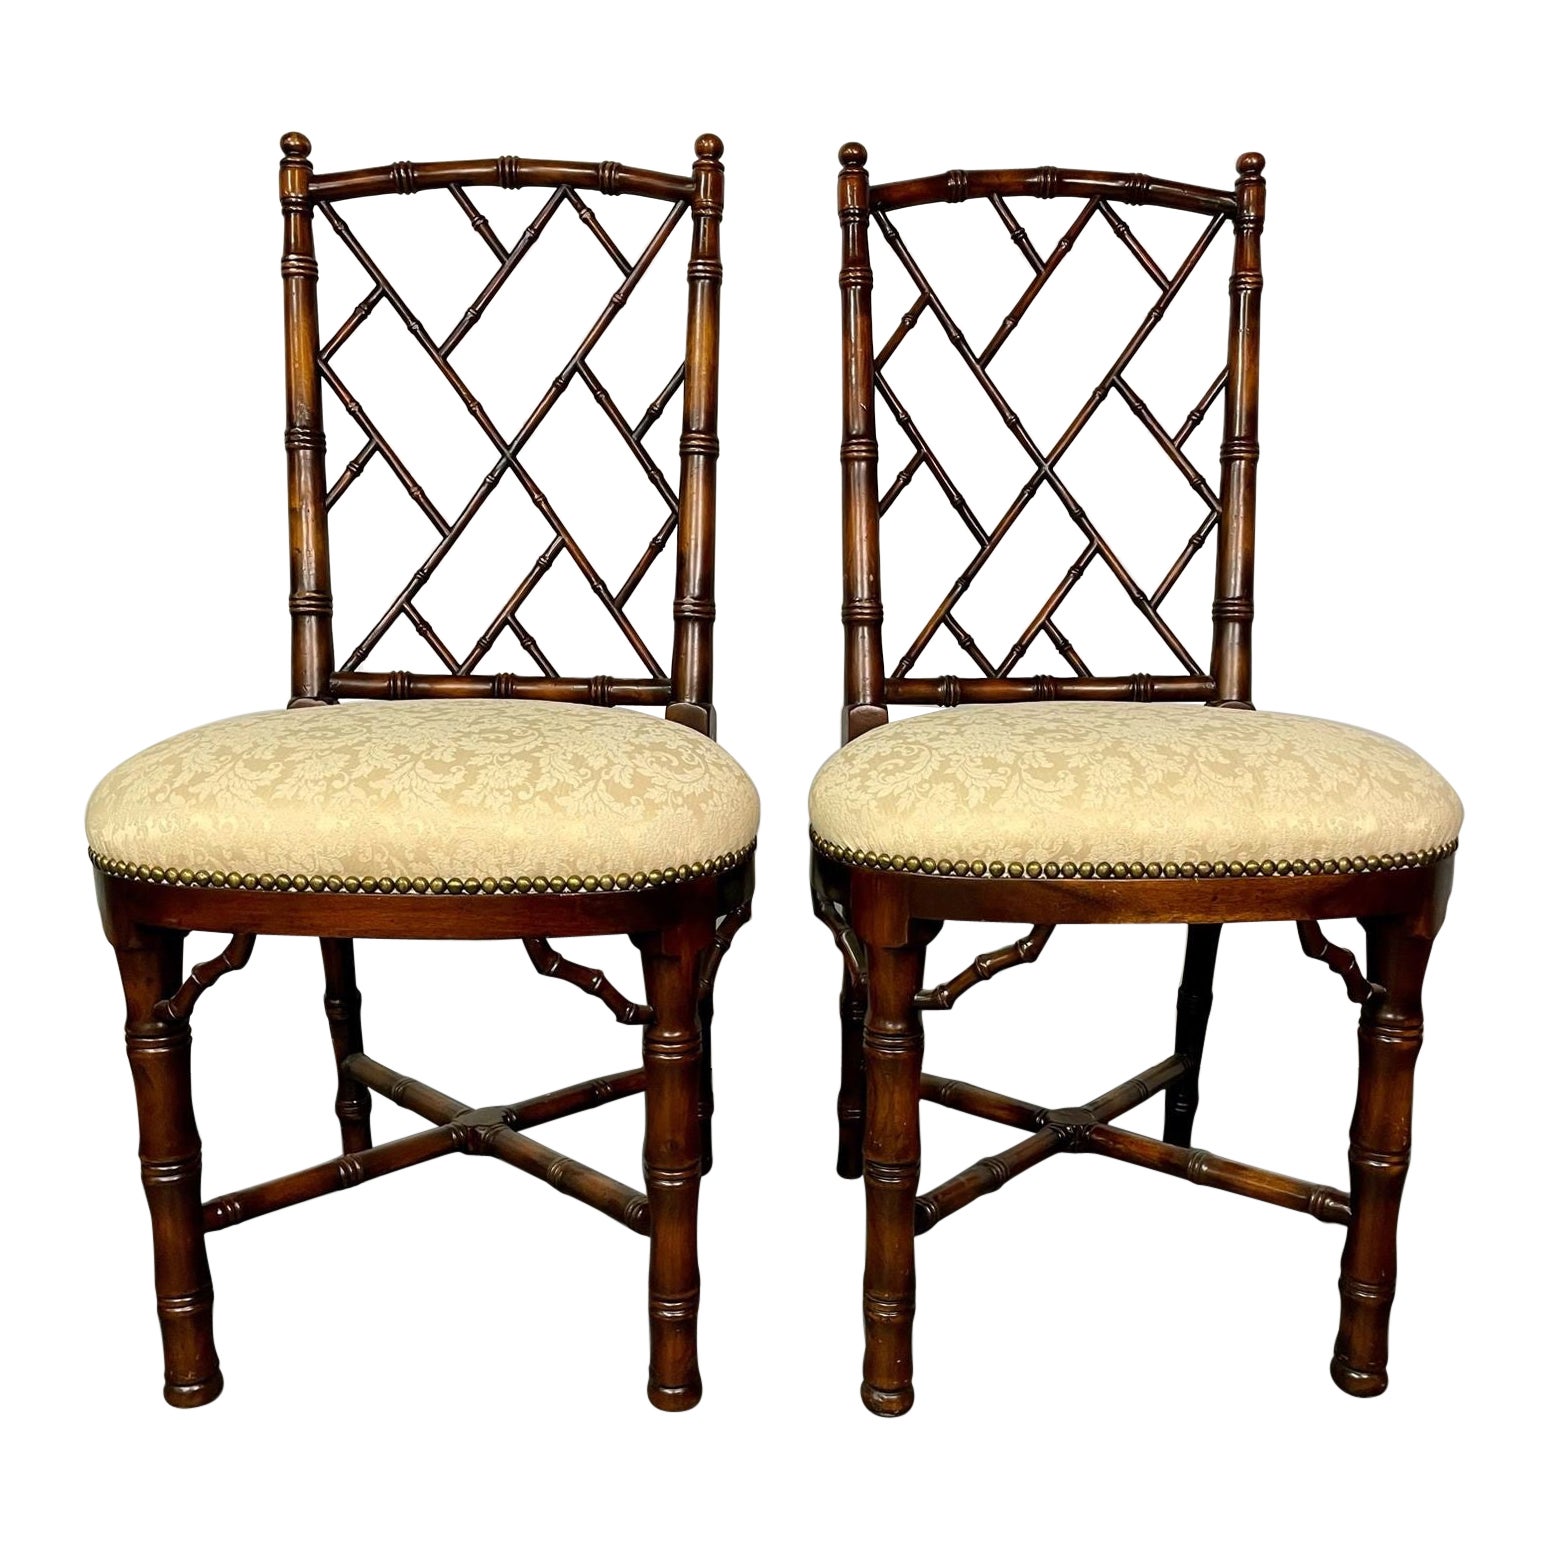 Pair of Bamboo Side, Desk Chairs, Damask Upholstery, Brass Tack Detailing